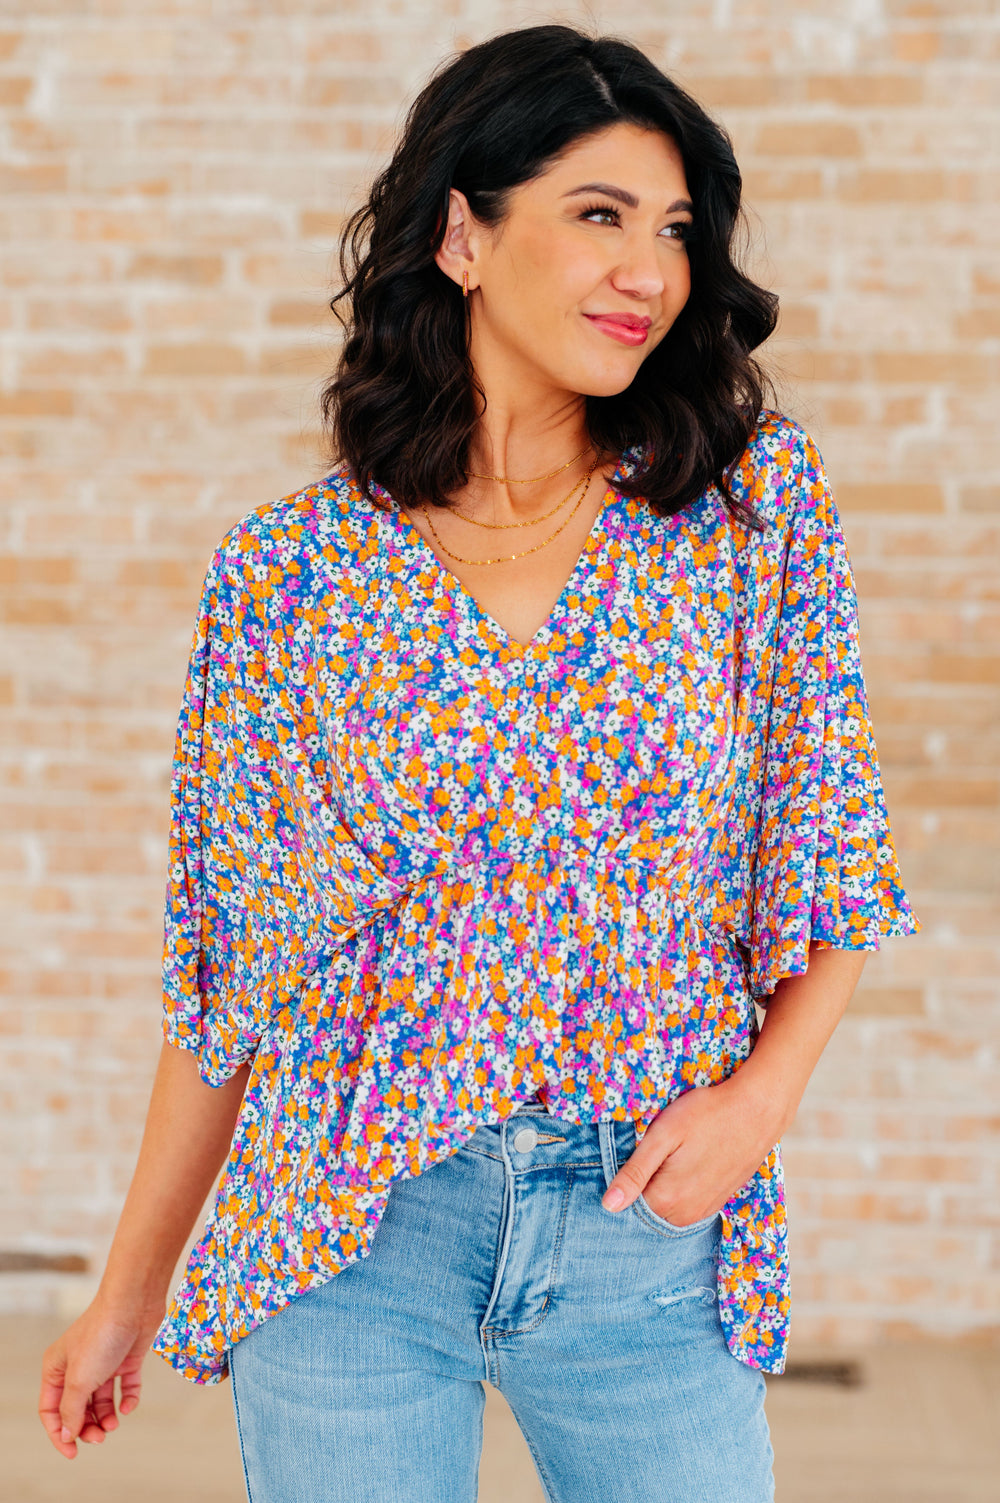 Dreamer Peplum Top in Purple Retro Ditsy Floral-Long Sleeve Tops-Inspired by Justeen-Women's Clothing Boutique in Chicago, Illinois